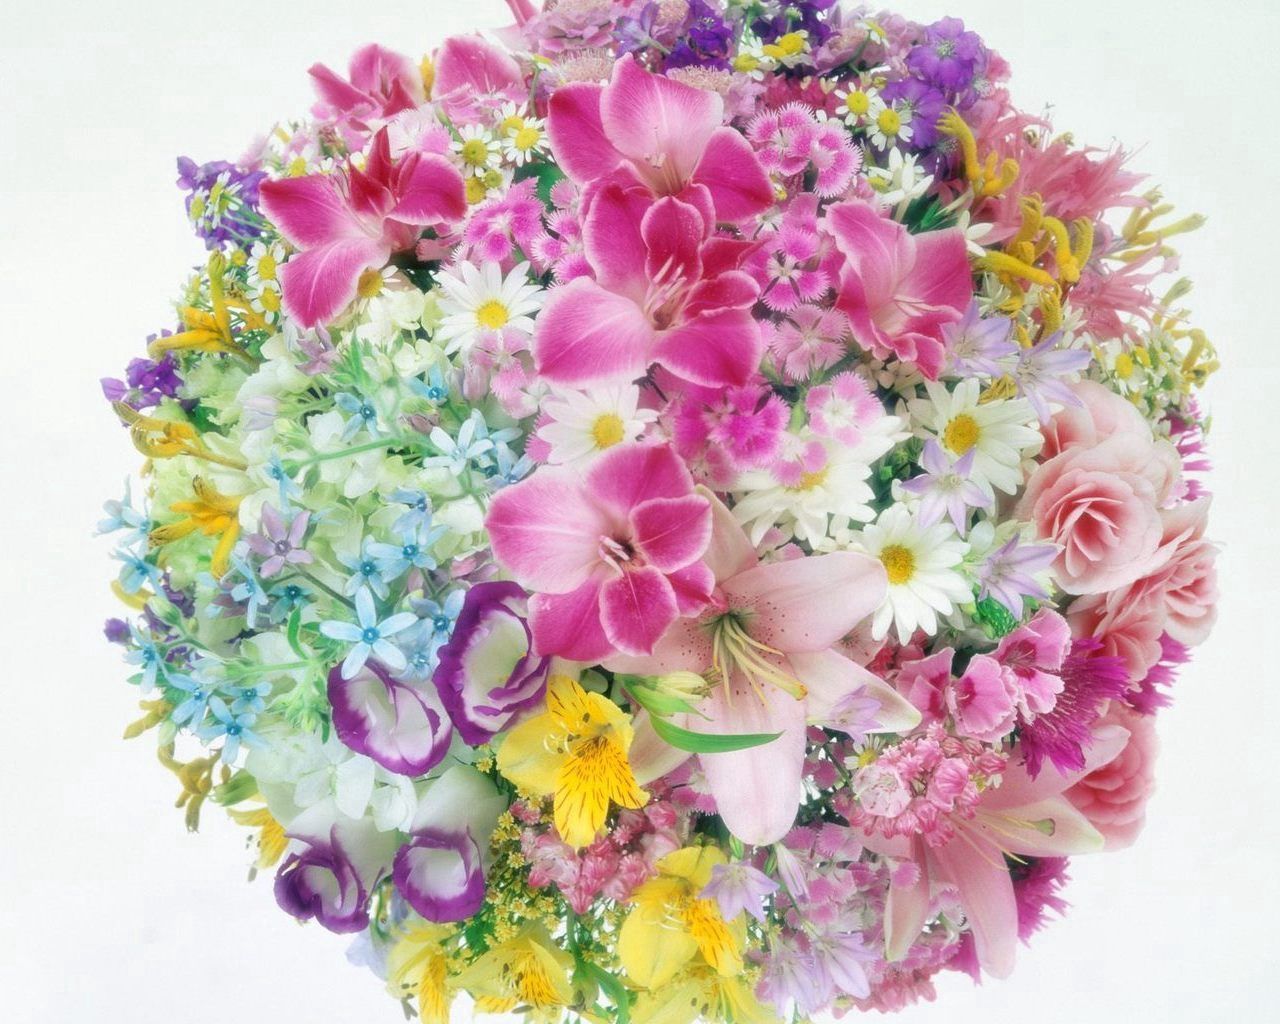 Free HD carnations, camomile, flowers, roses, lilies, bouquet, ball, tenderness